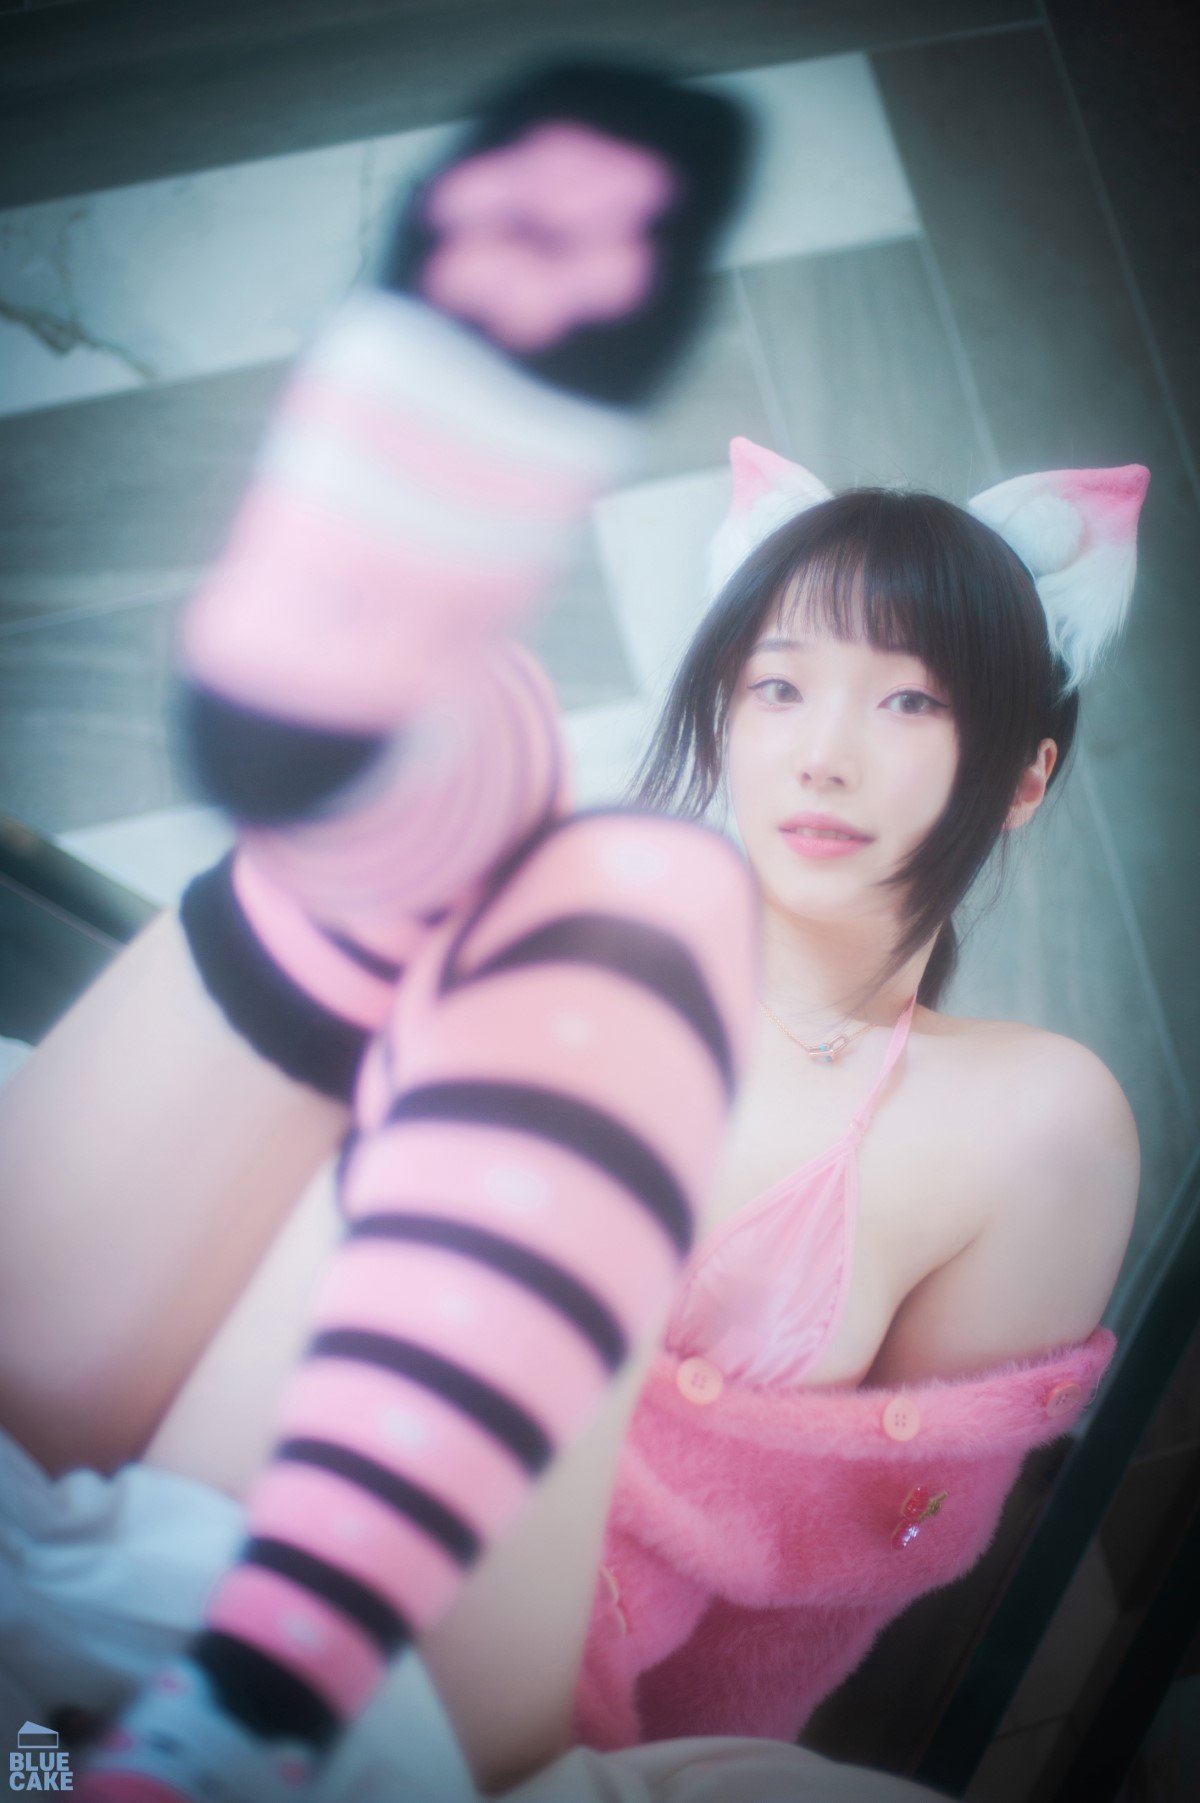 BLUECAKE Bambi 밤비 Naughty Cats Pink And Mint RED A 0015 0301690256.jpg